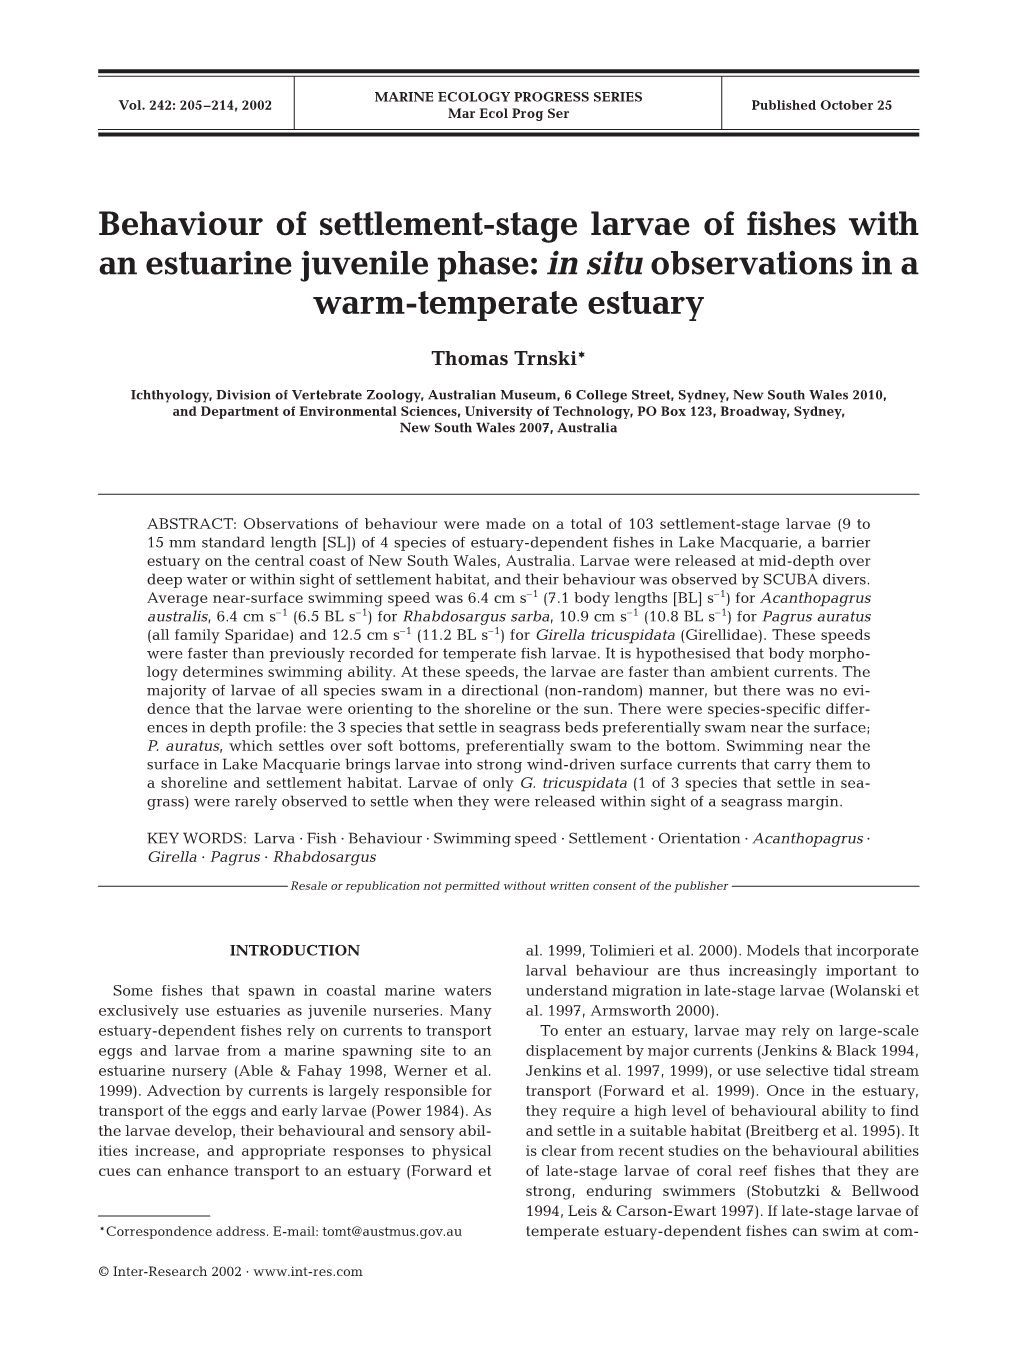 Behaviour of Settlement-Stage Larvae of Fishes with an Estuarine Juvenile Phase: in Situ Observations in a Warm-Temperate Estuary